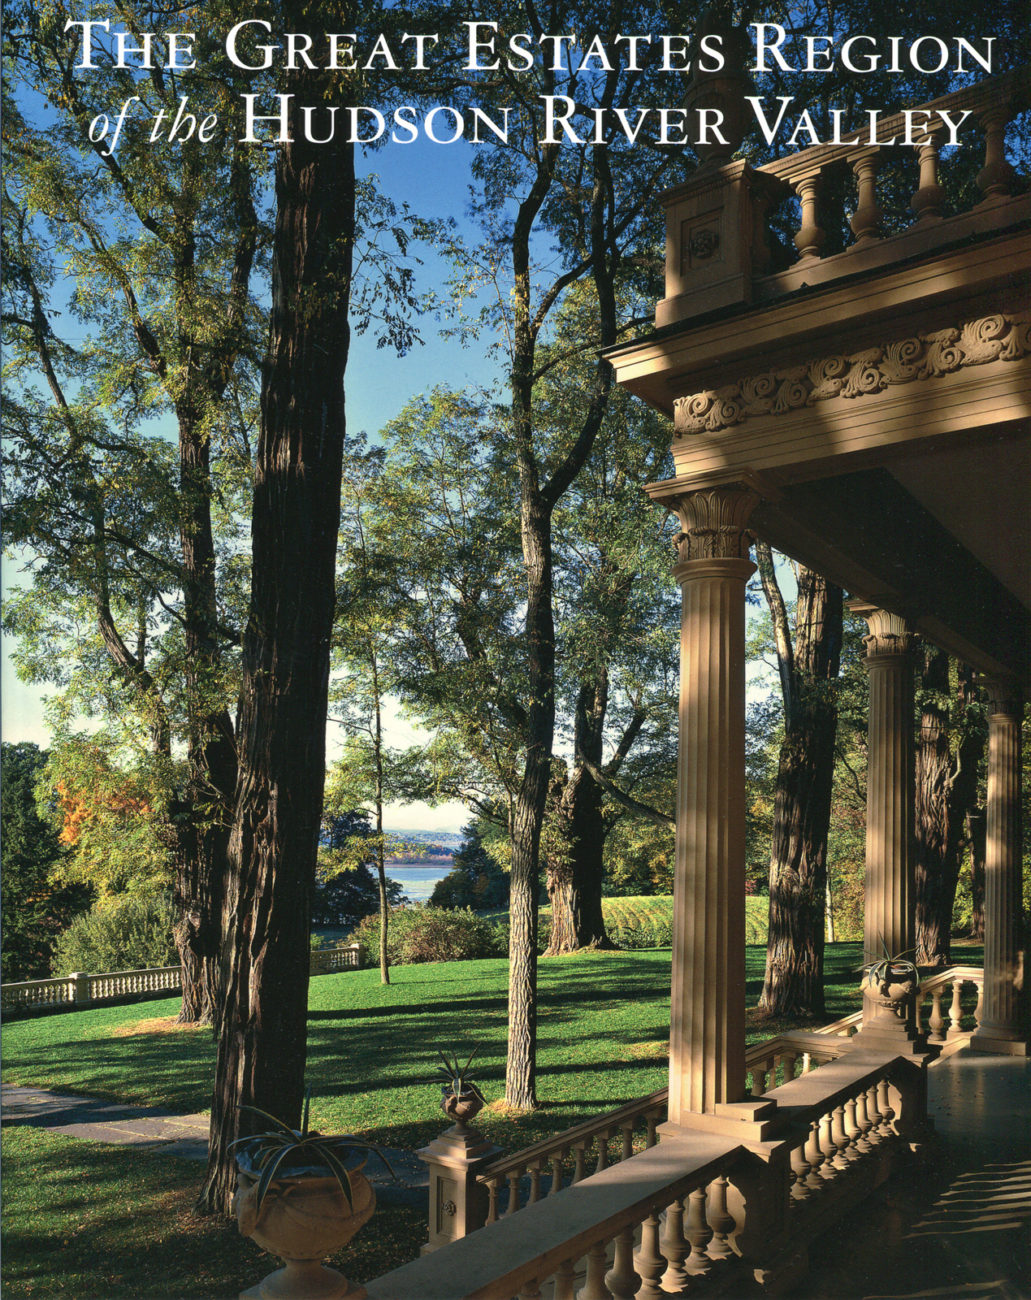 The Great Estates Region of the Hudson River Valley, available in the Wilderstein Gift Shop